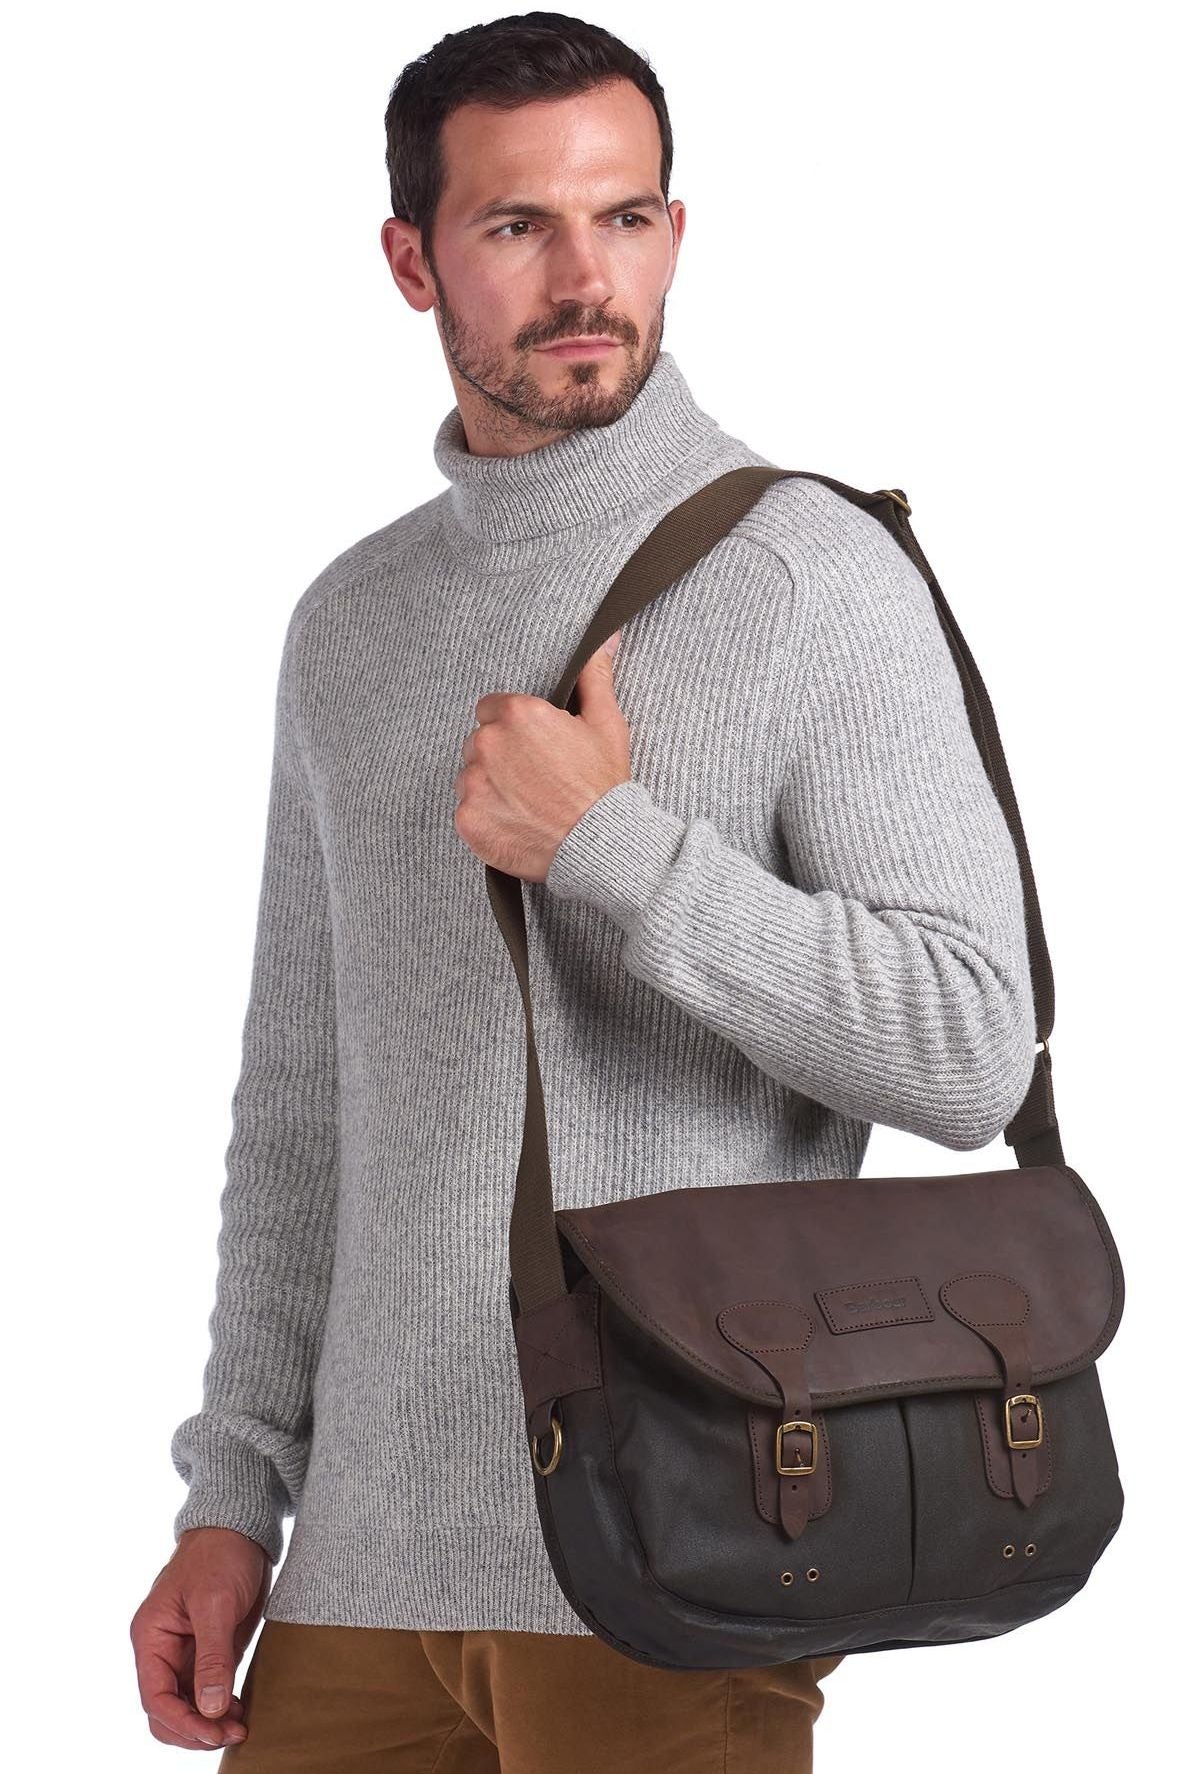 Trend Focus: The “Man Purse” | TheStylishLife